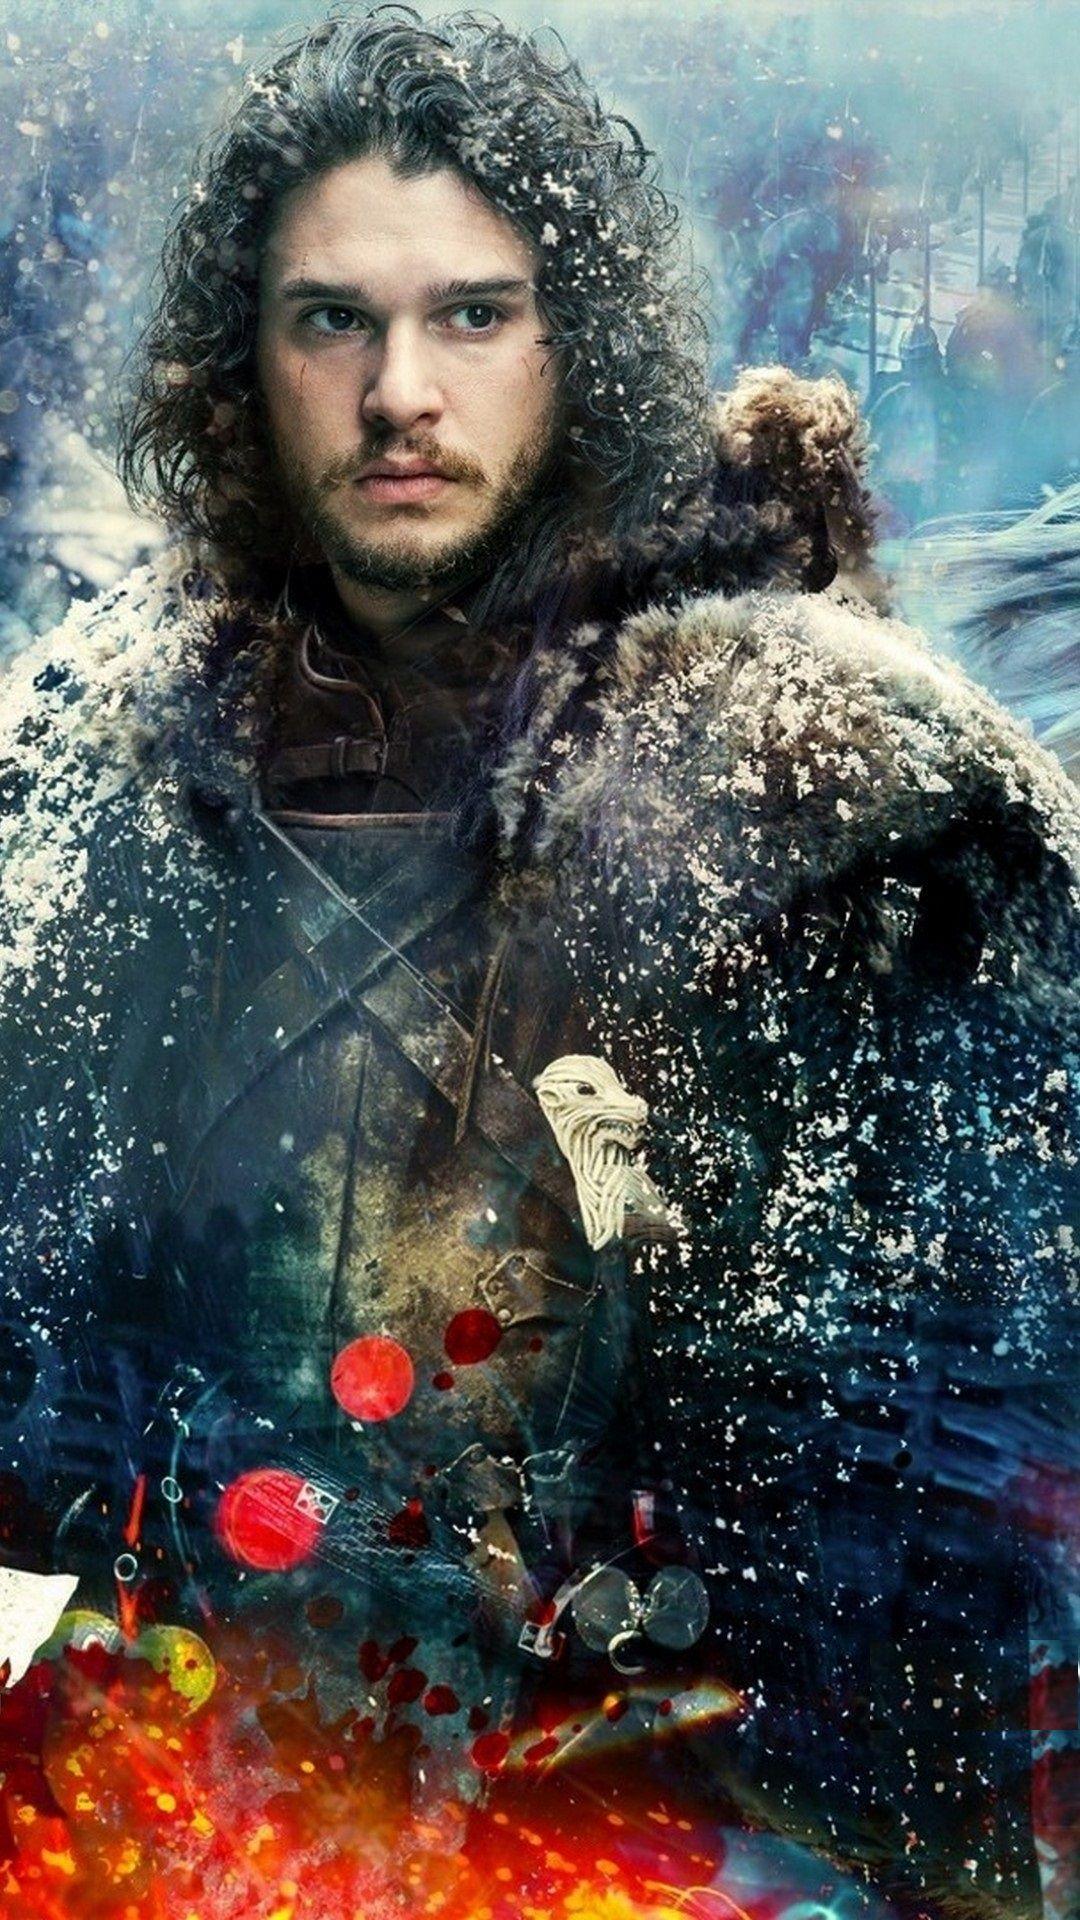 1080 x 1920 · jpeg - View Game Of Thrones Mobile Wallpaper Reddit Images